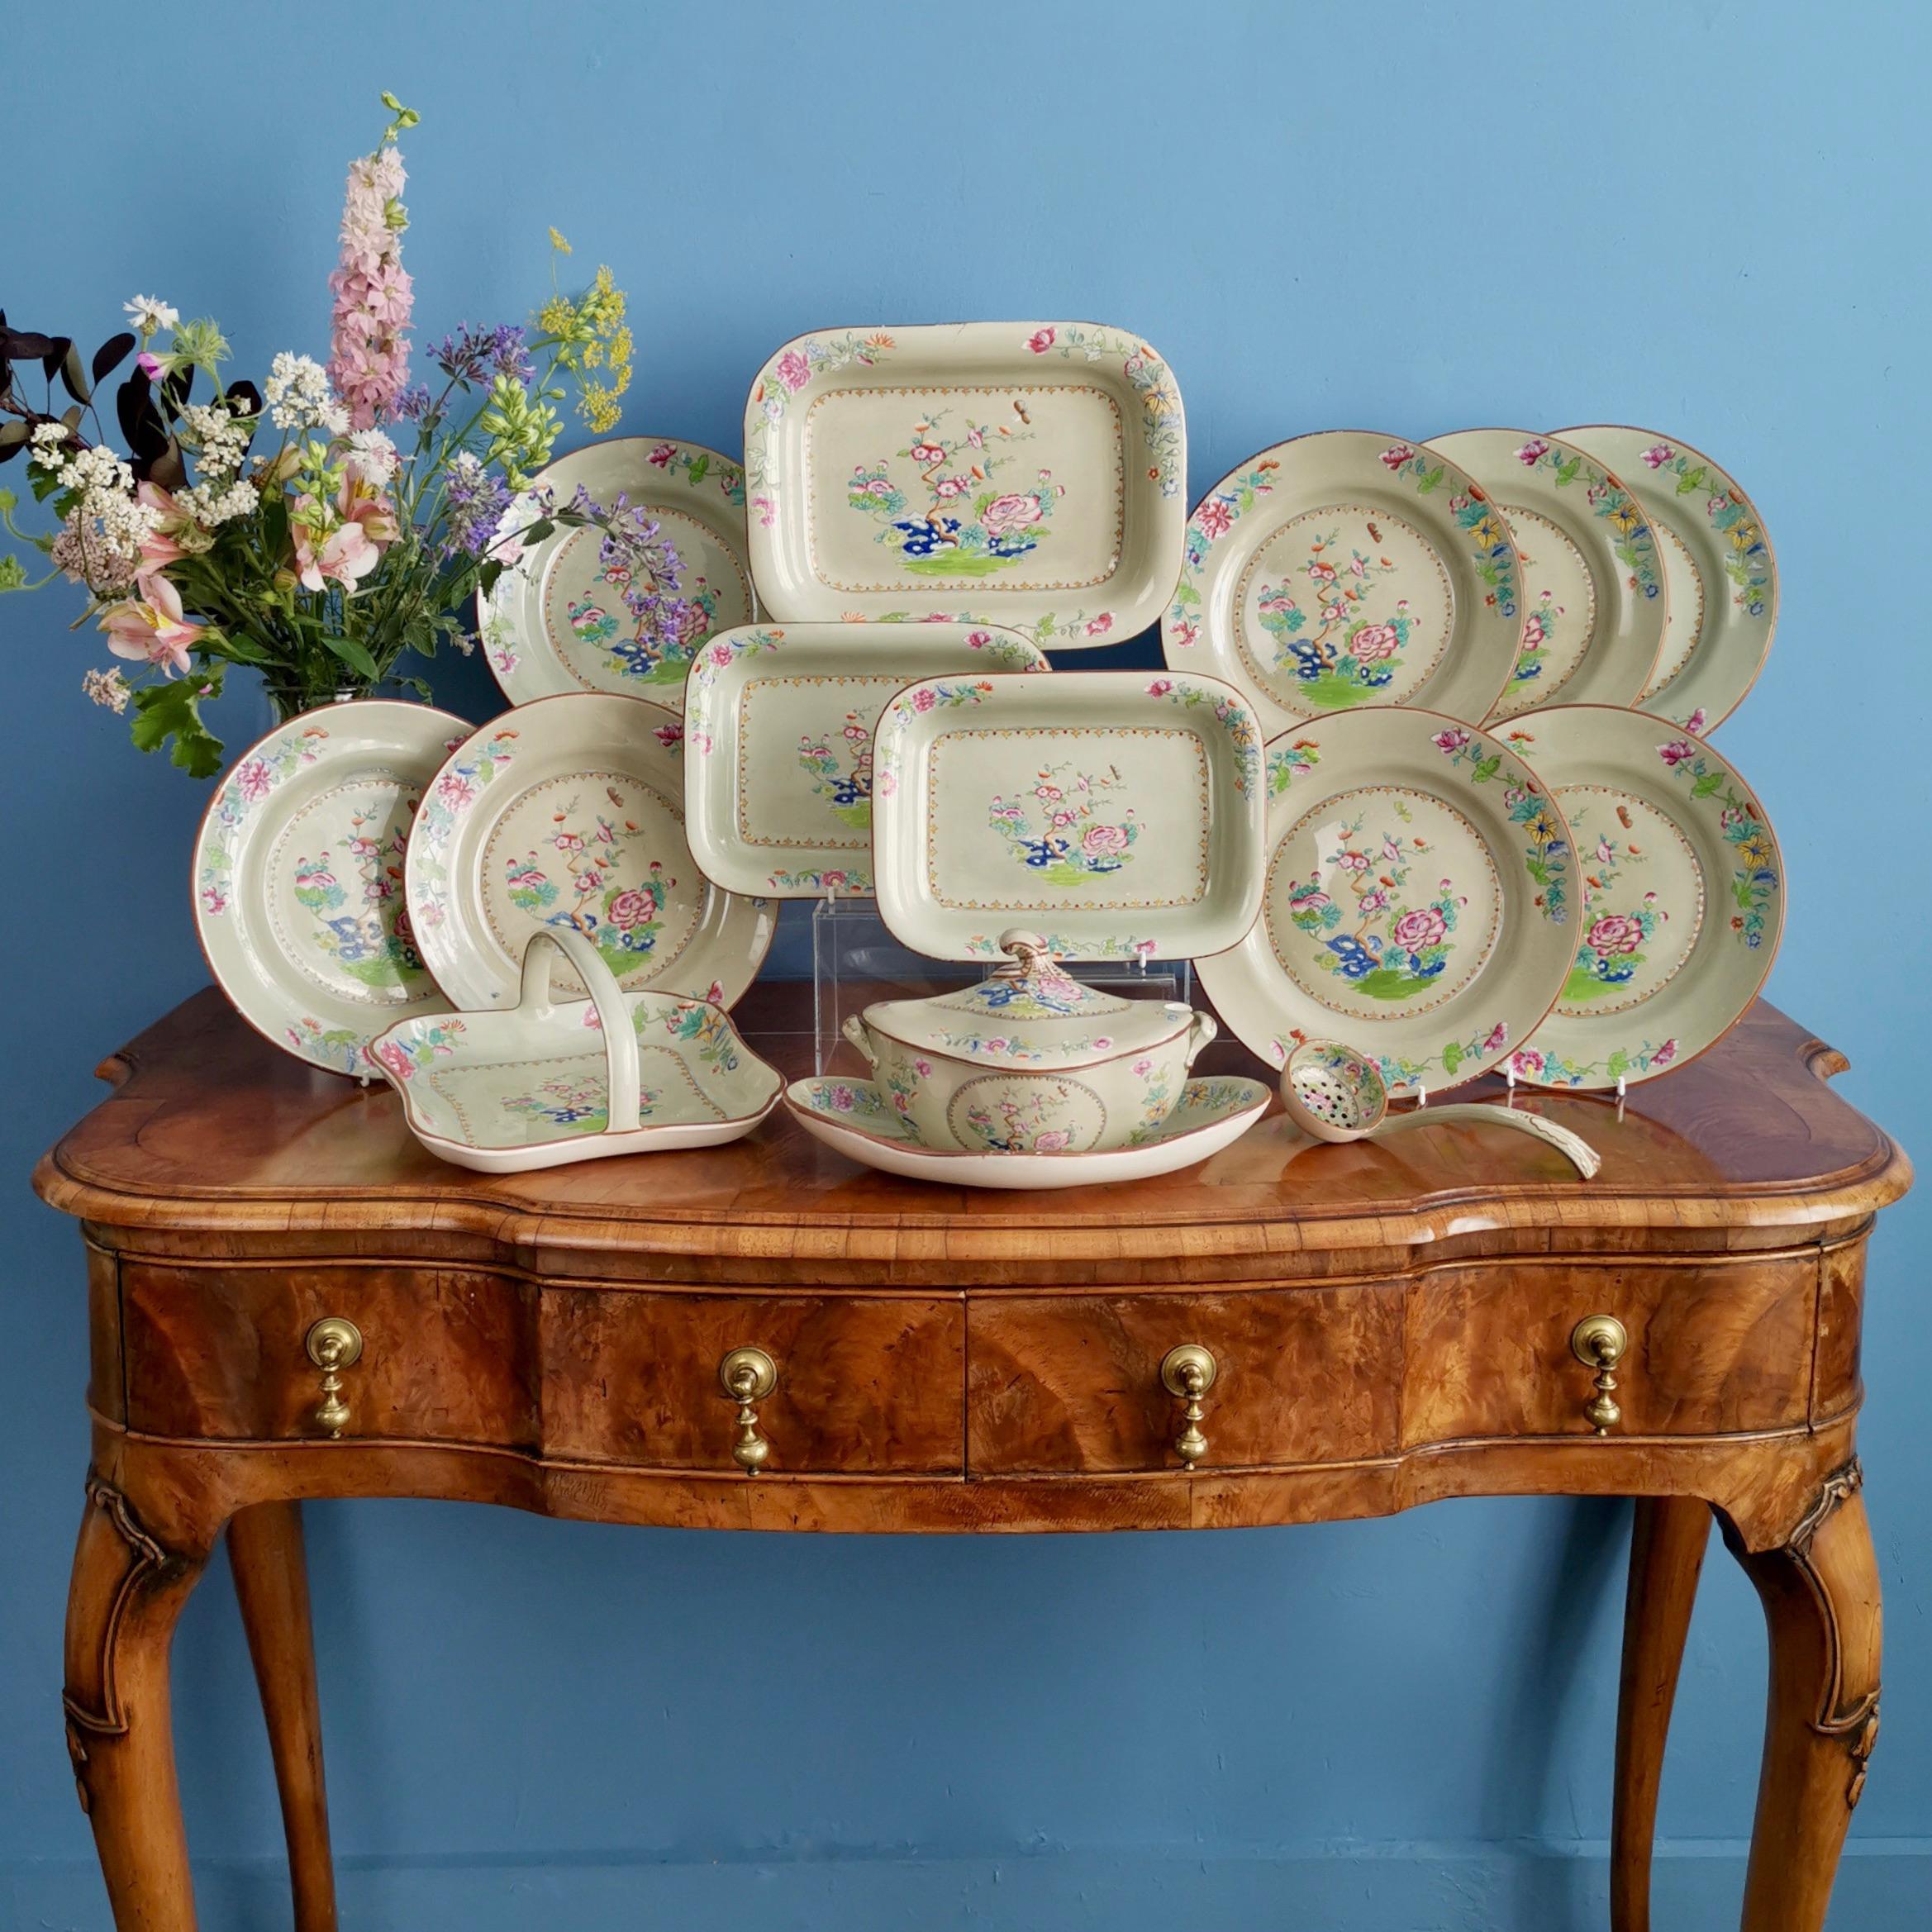 This is a beautiful Spode creamware dessert service made in 1814, which was the Regency era. The service is decorated in a printed and hand-colored Chinoiserie design on an avocado green ground, called the Willis pattern with the number 2147. The